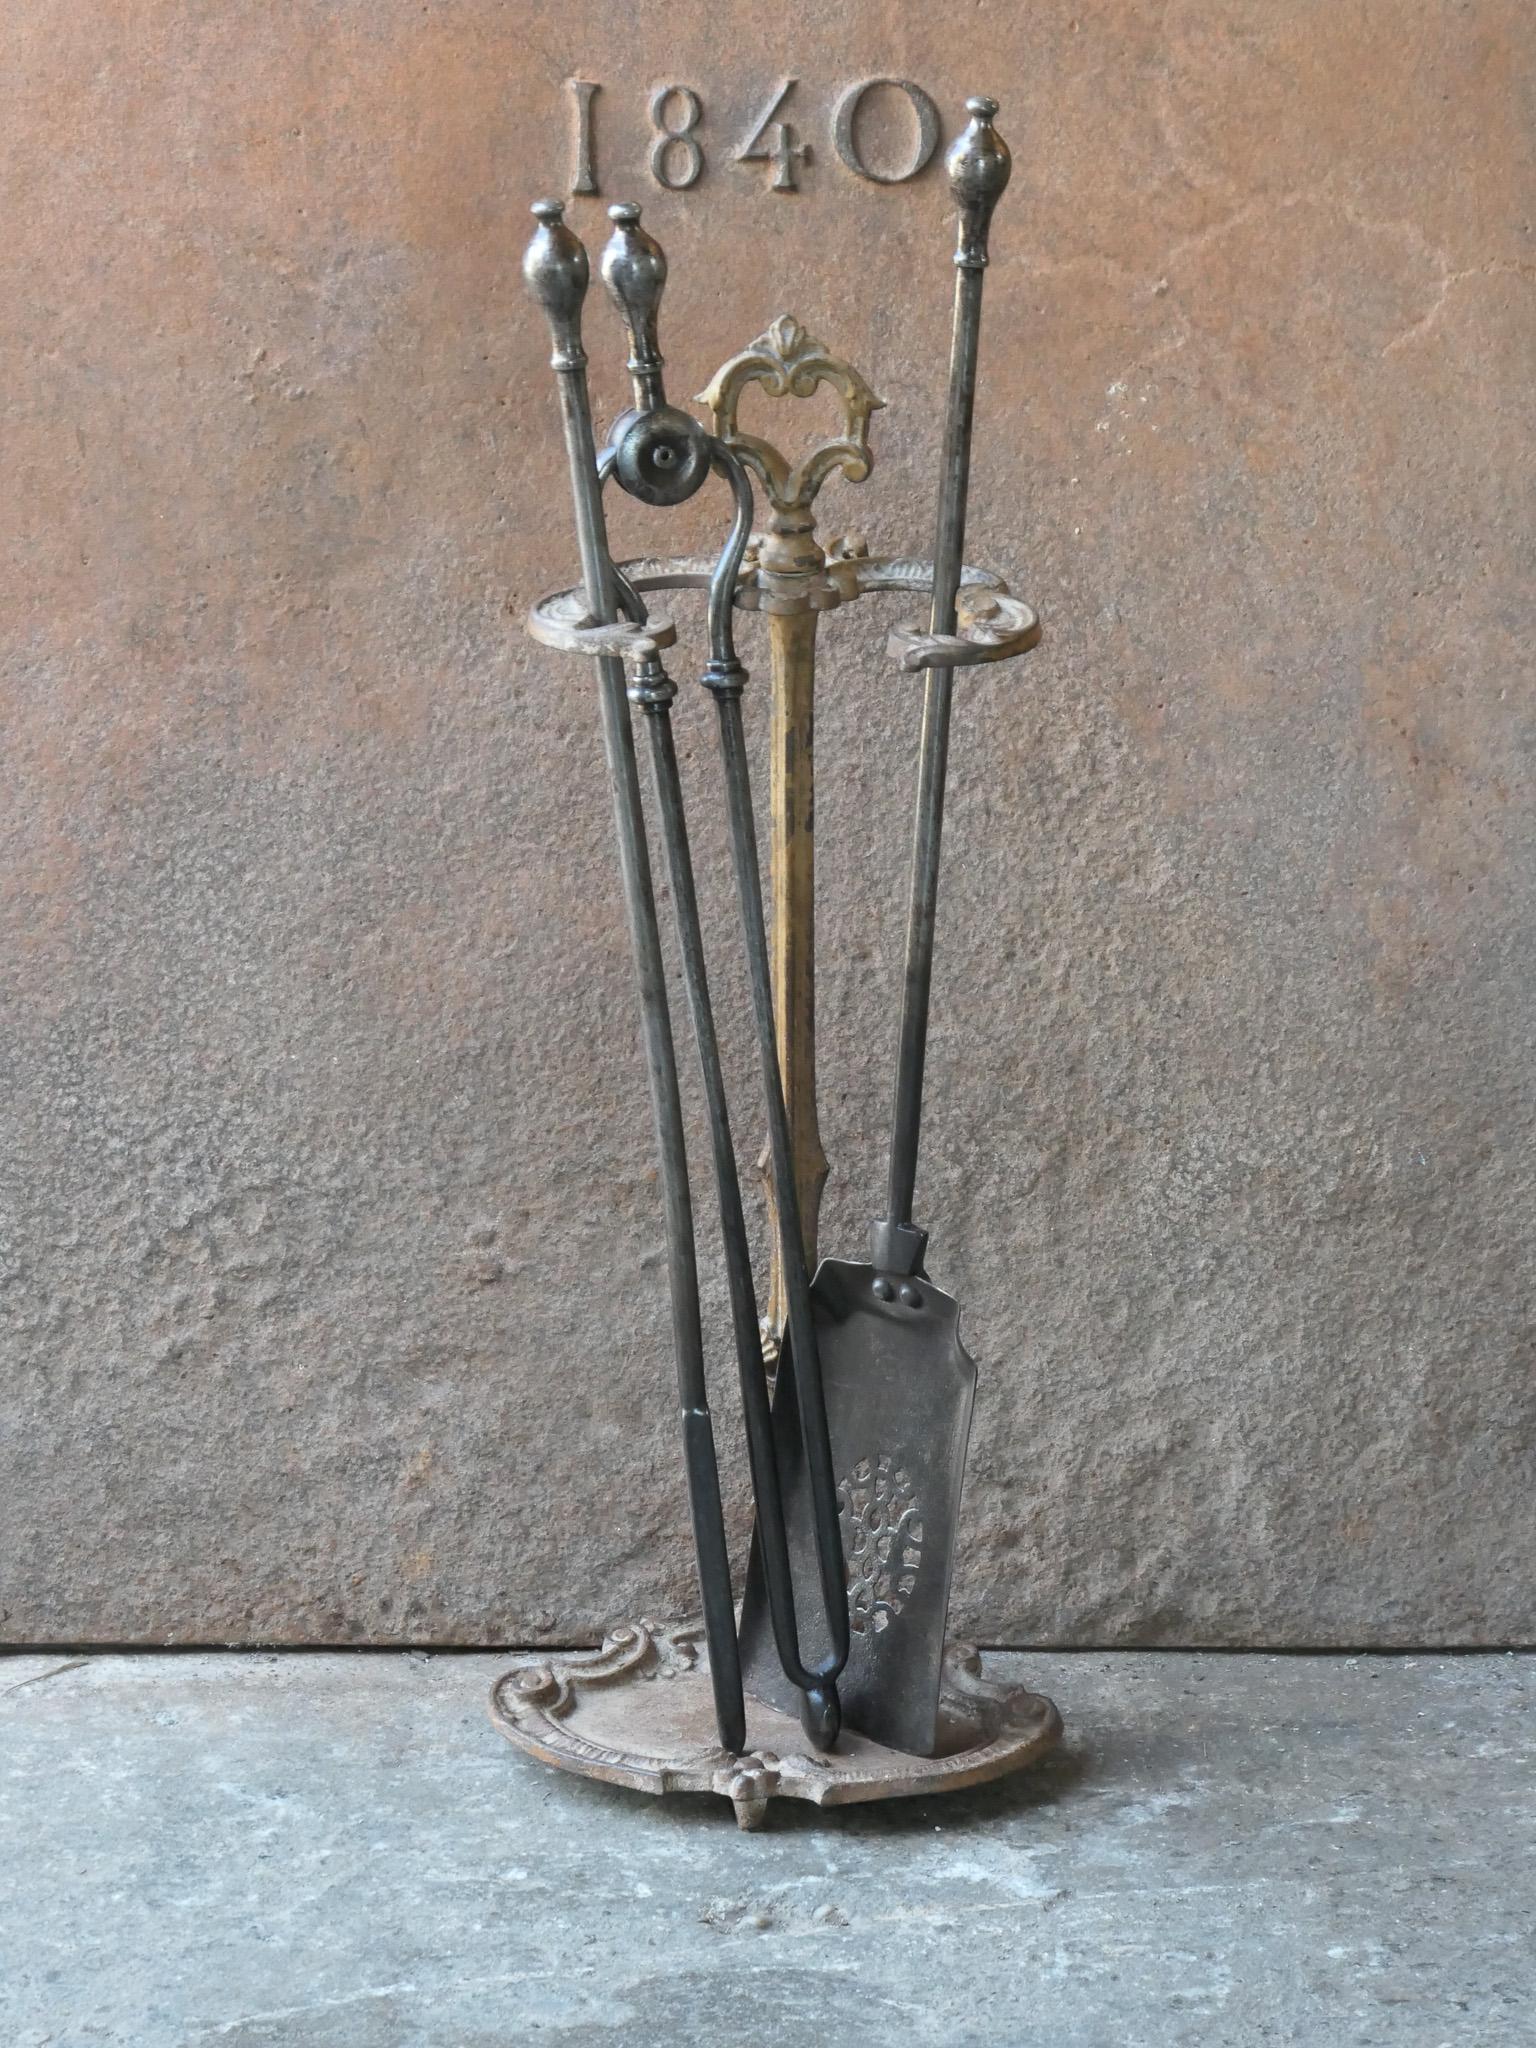 19th century English Victorian period fireplace toolset. The tools are made of wrought iron, while the stand is made of brass. The toolset consists of tongs, poker, shovel and stand. The condition is good.








.